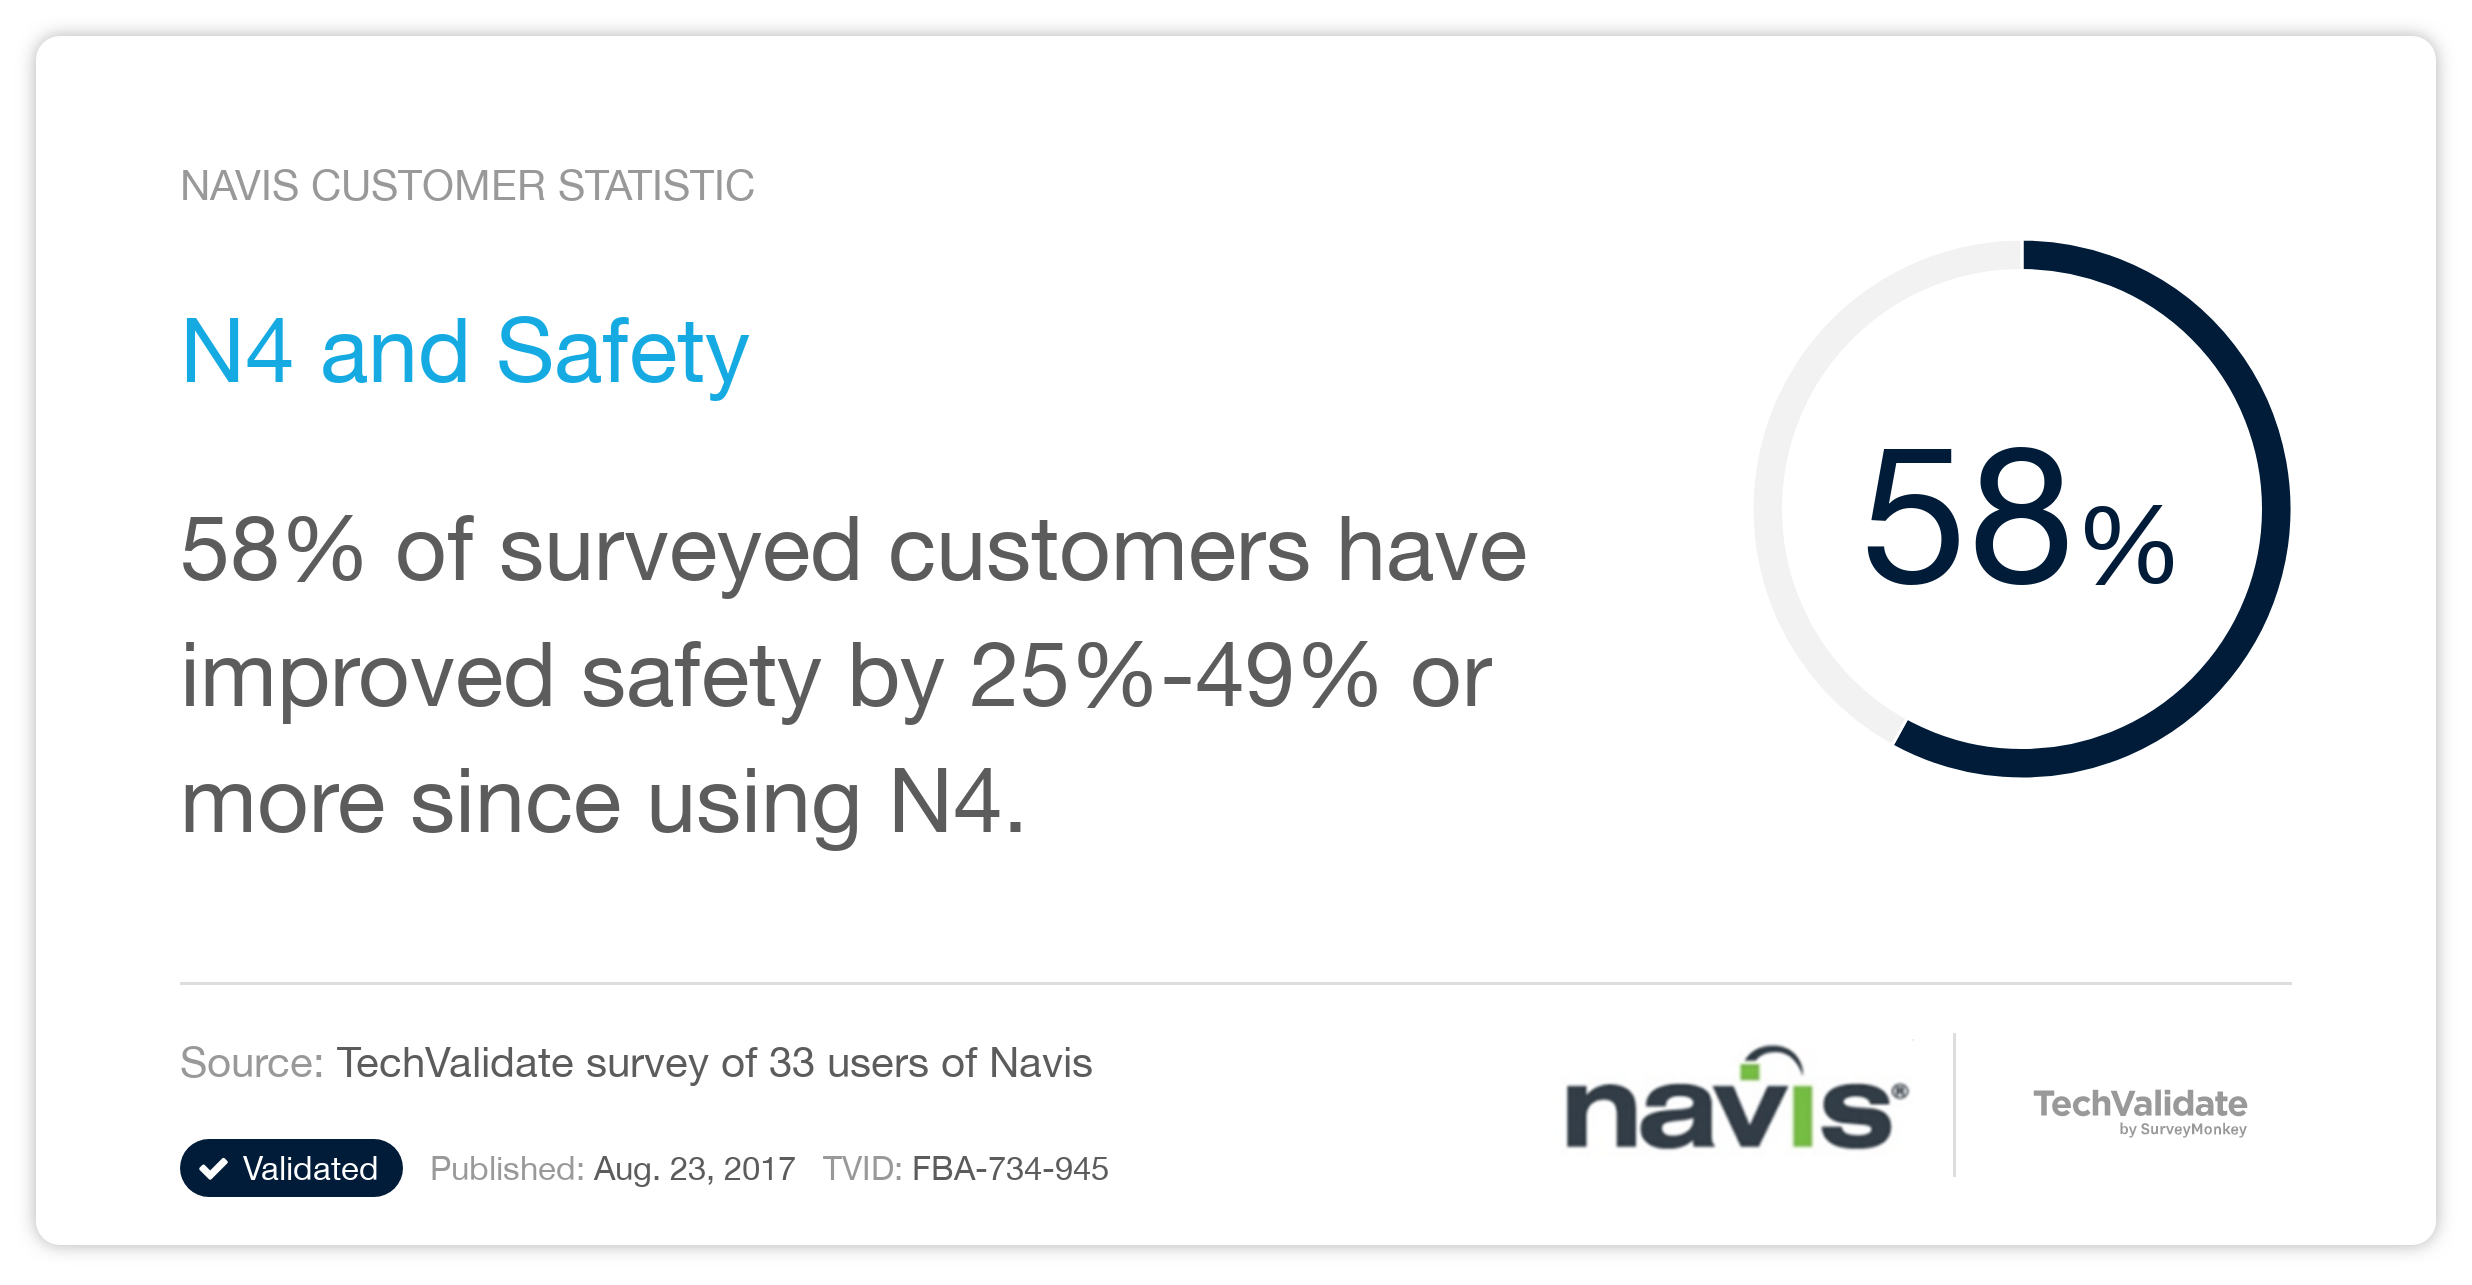 N4 and Safety